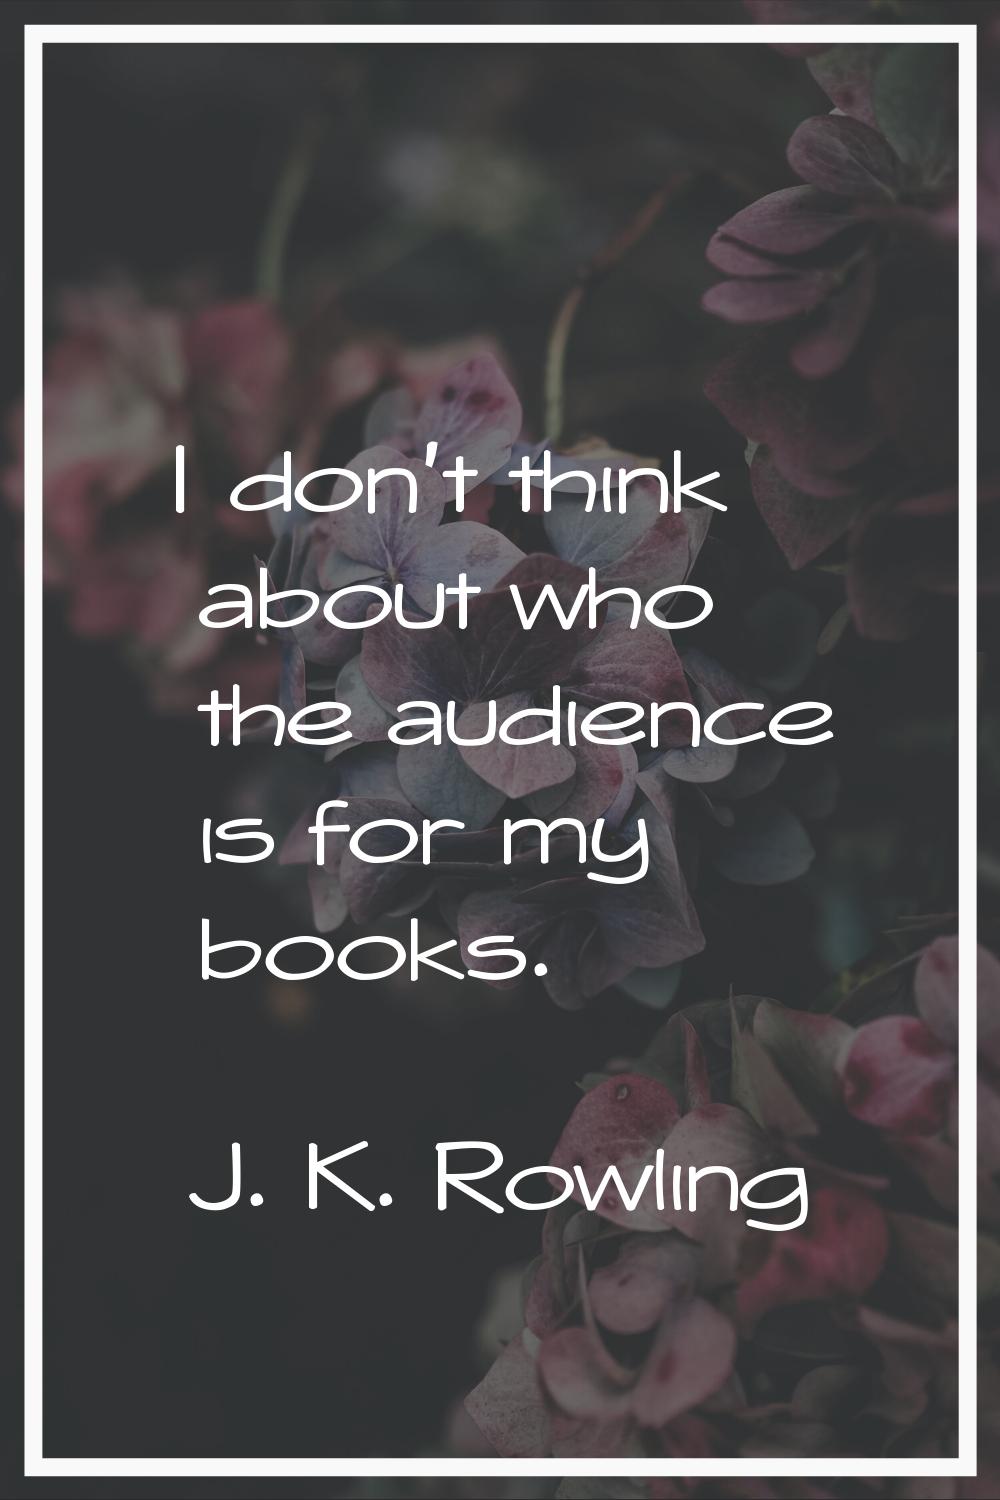 I don't think about who the audience is for my books.